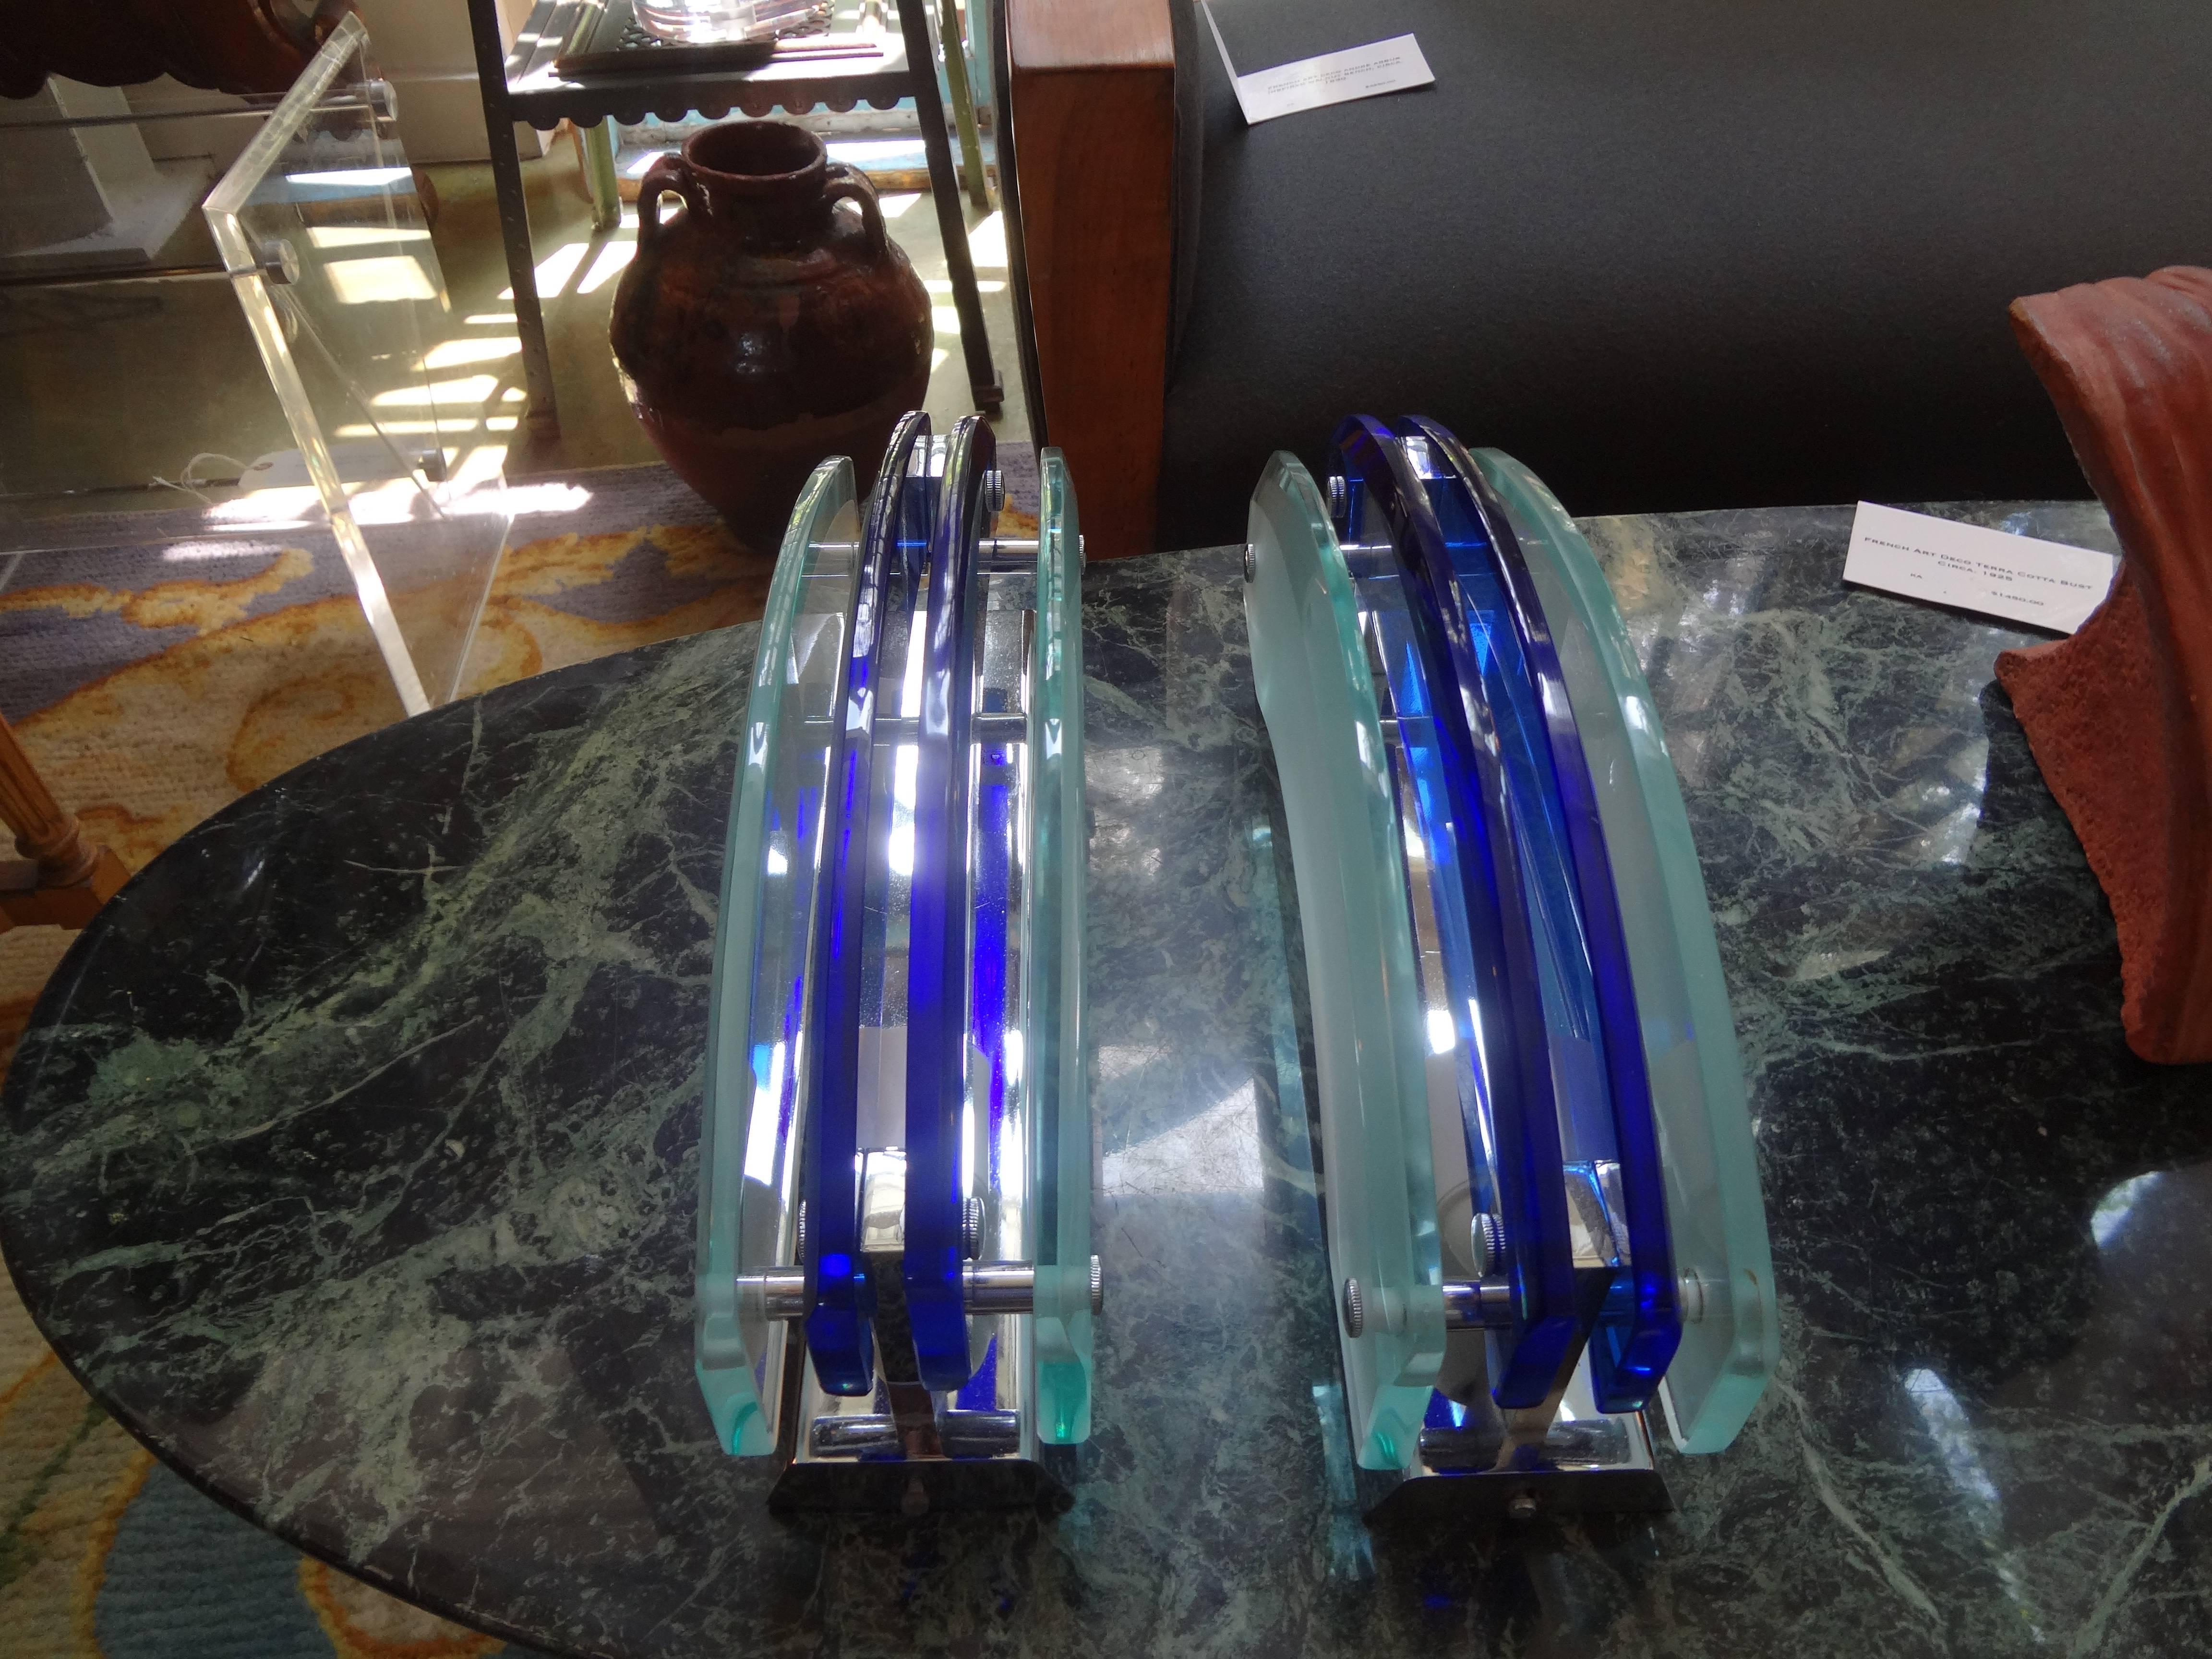 Great pair of Italian Mid-Century Modern Murano glass sconces by Veca comprised of two sheets of frosted beveled glass on the exterior and two sheets of cobalt blue beveled glass in the center. These vintage Murano glass sconces have an Art Deco or